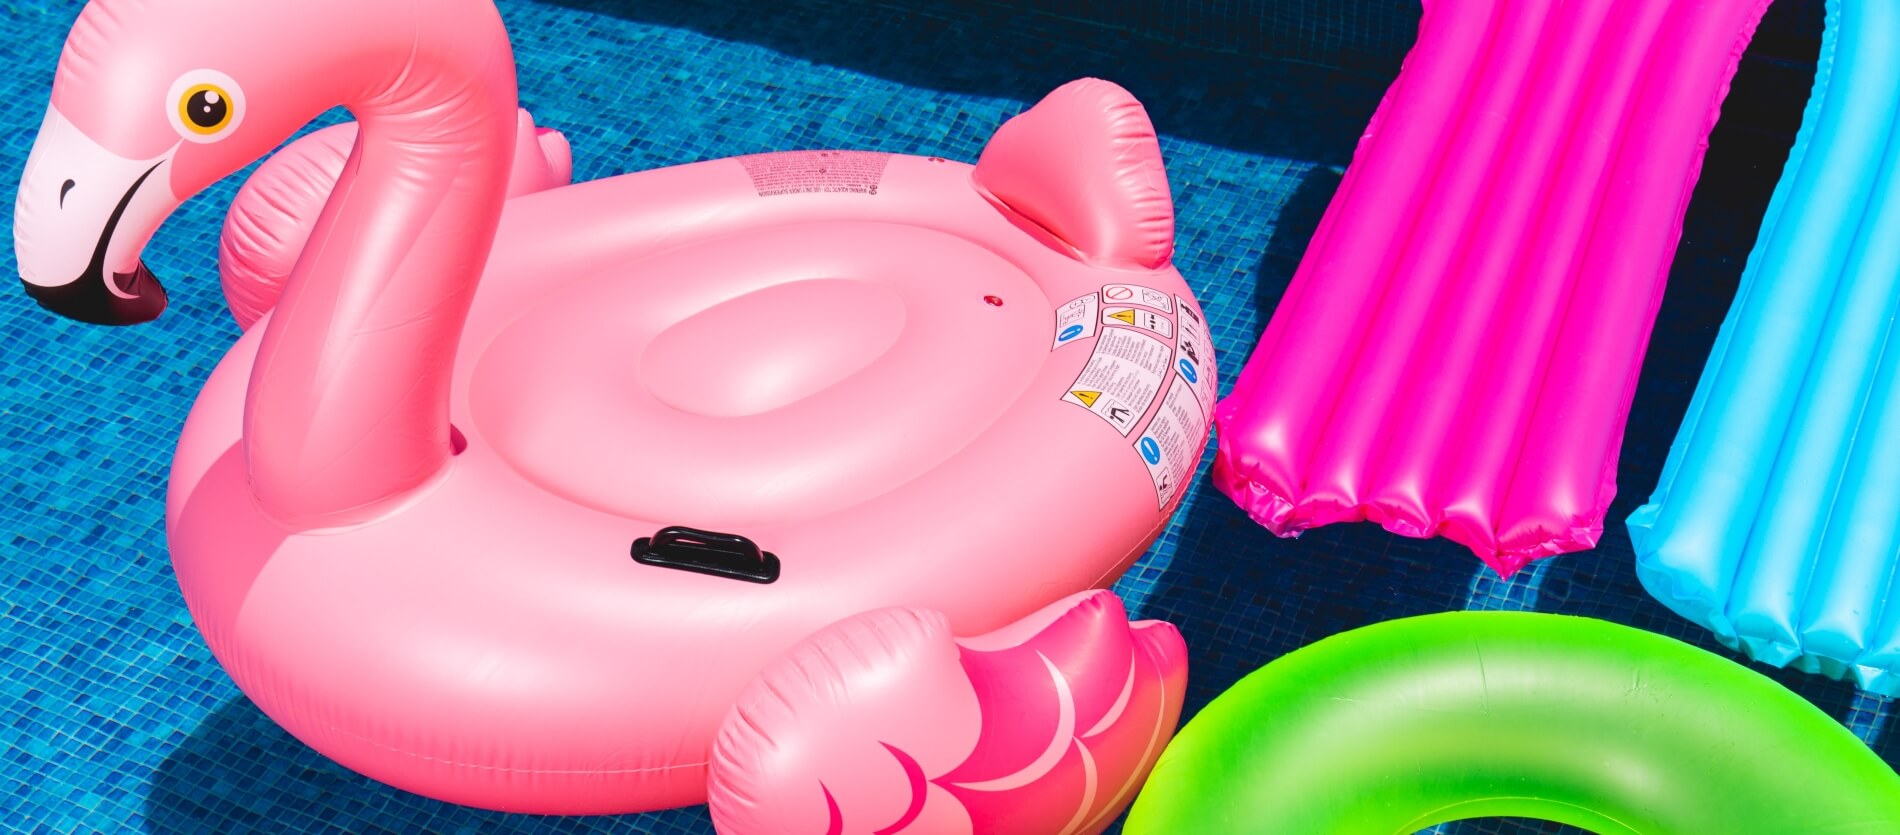 Four inflatable pool accessories including a large pink flamingo, green tube and pink and blue sun loungers